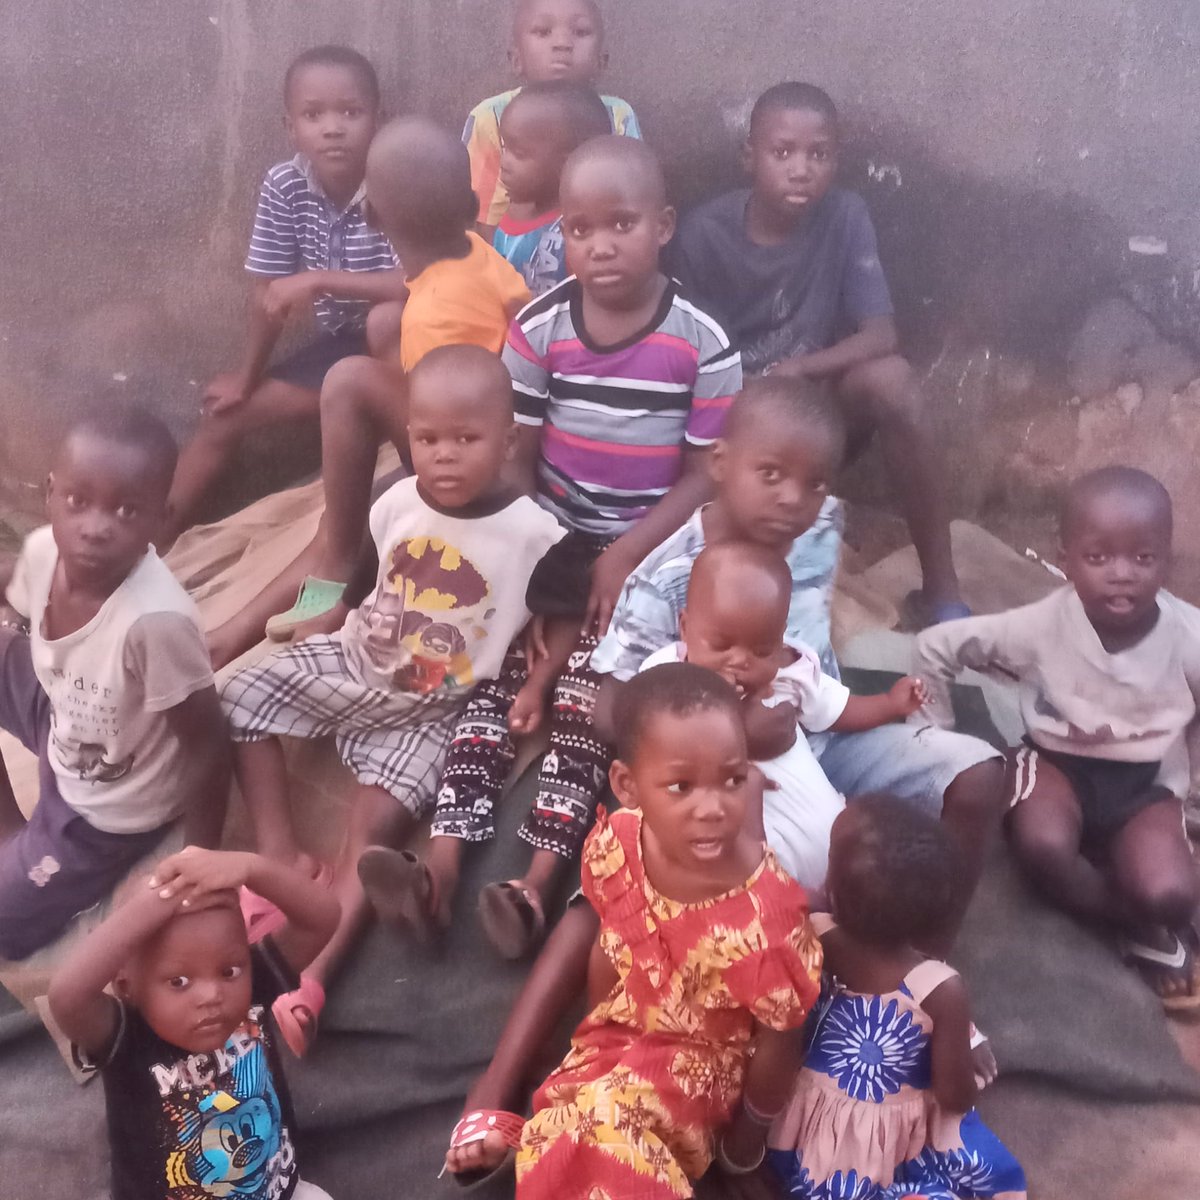 Greetings brothers and sisters in Christ,please put our orphanage in your prayers, the situation is worse these are the kids in our orphanage they are really starving please pray for us. Am nolonger working yet we have no food we really need amiracle